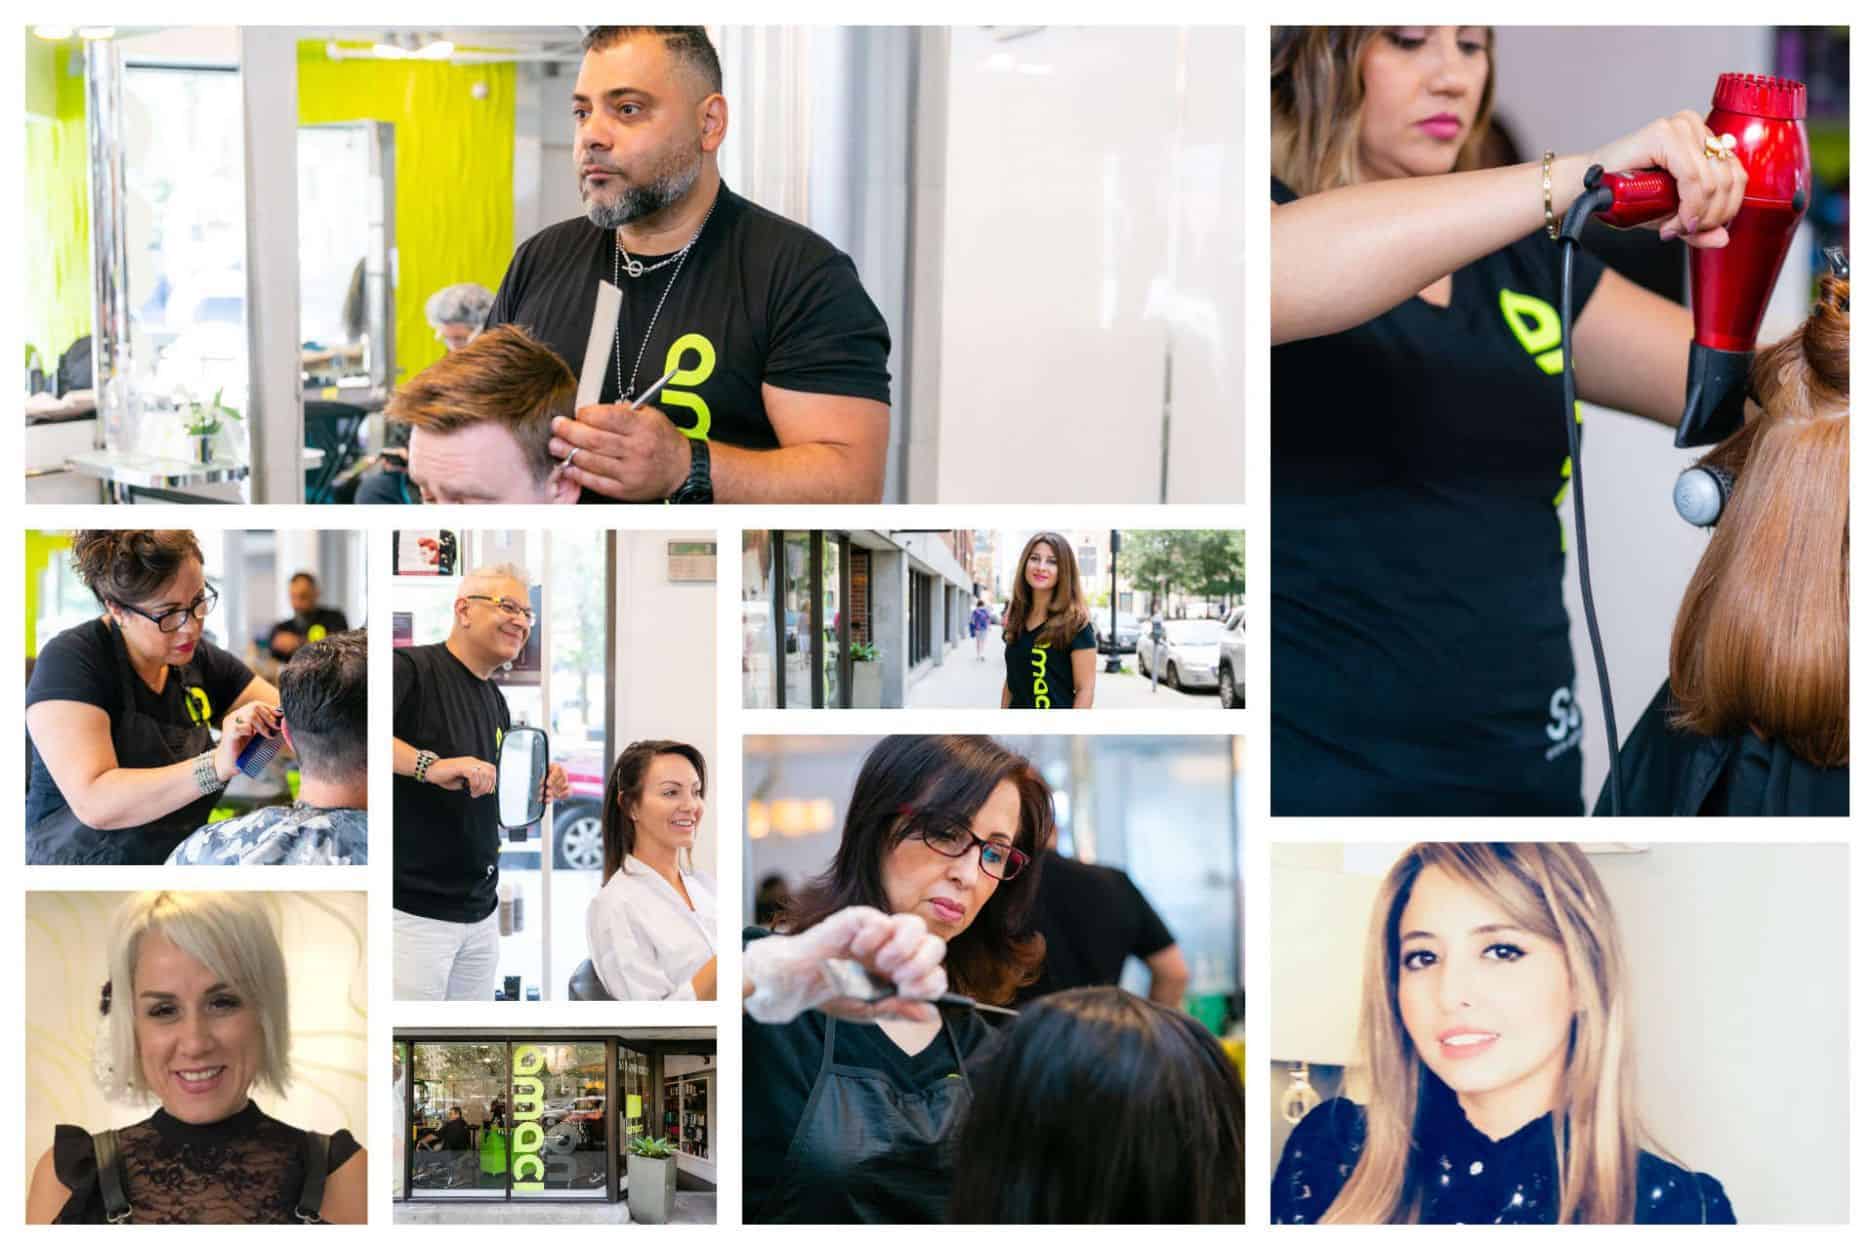 A montage of photos capturing a woman receiving a hair treatment at a salon, with hair styling tools visible - Amaci Salon.